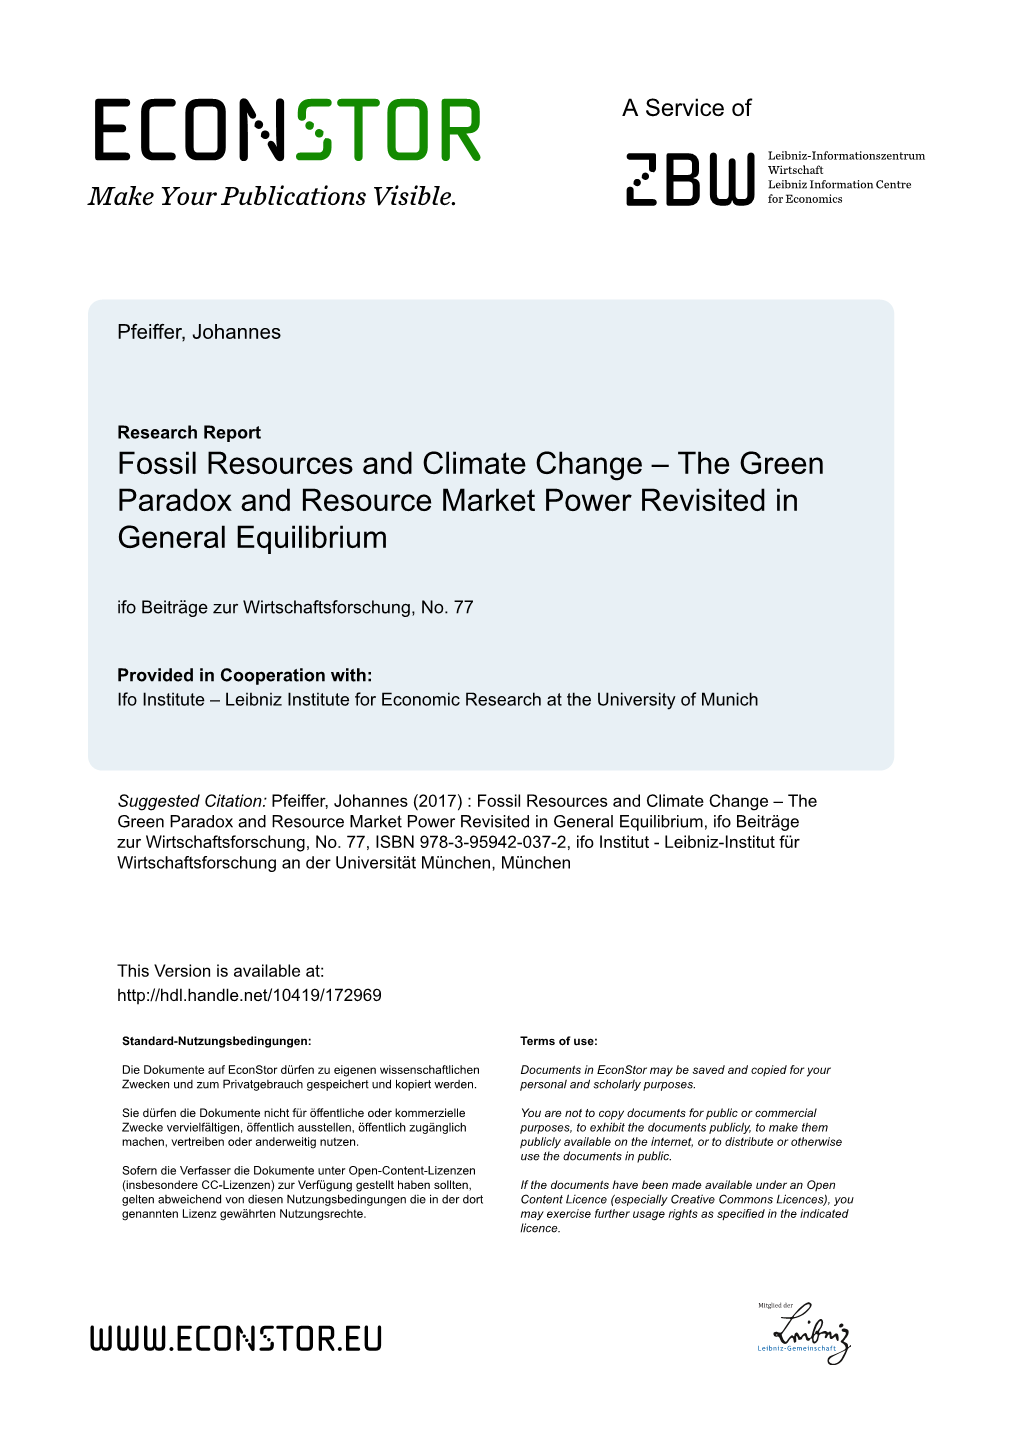 Fossil Resources and Climate Change – the Green Paradox and Resource Market Power Revisited in General Equilibrium